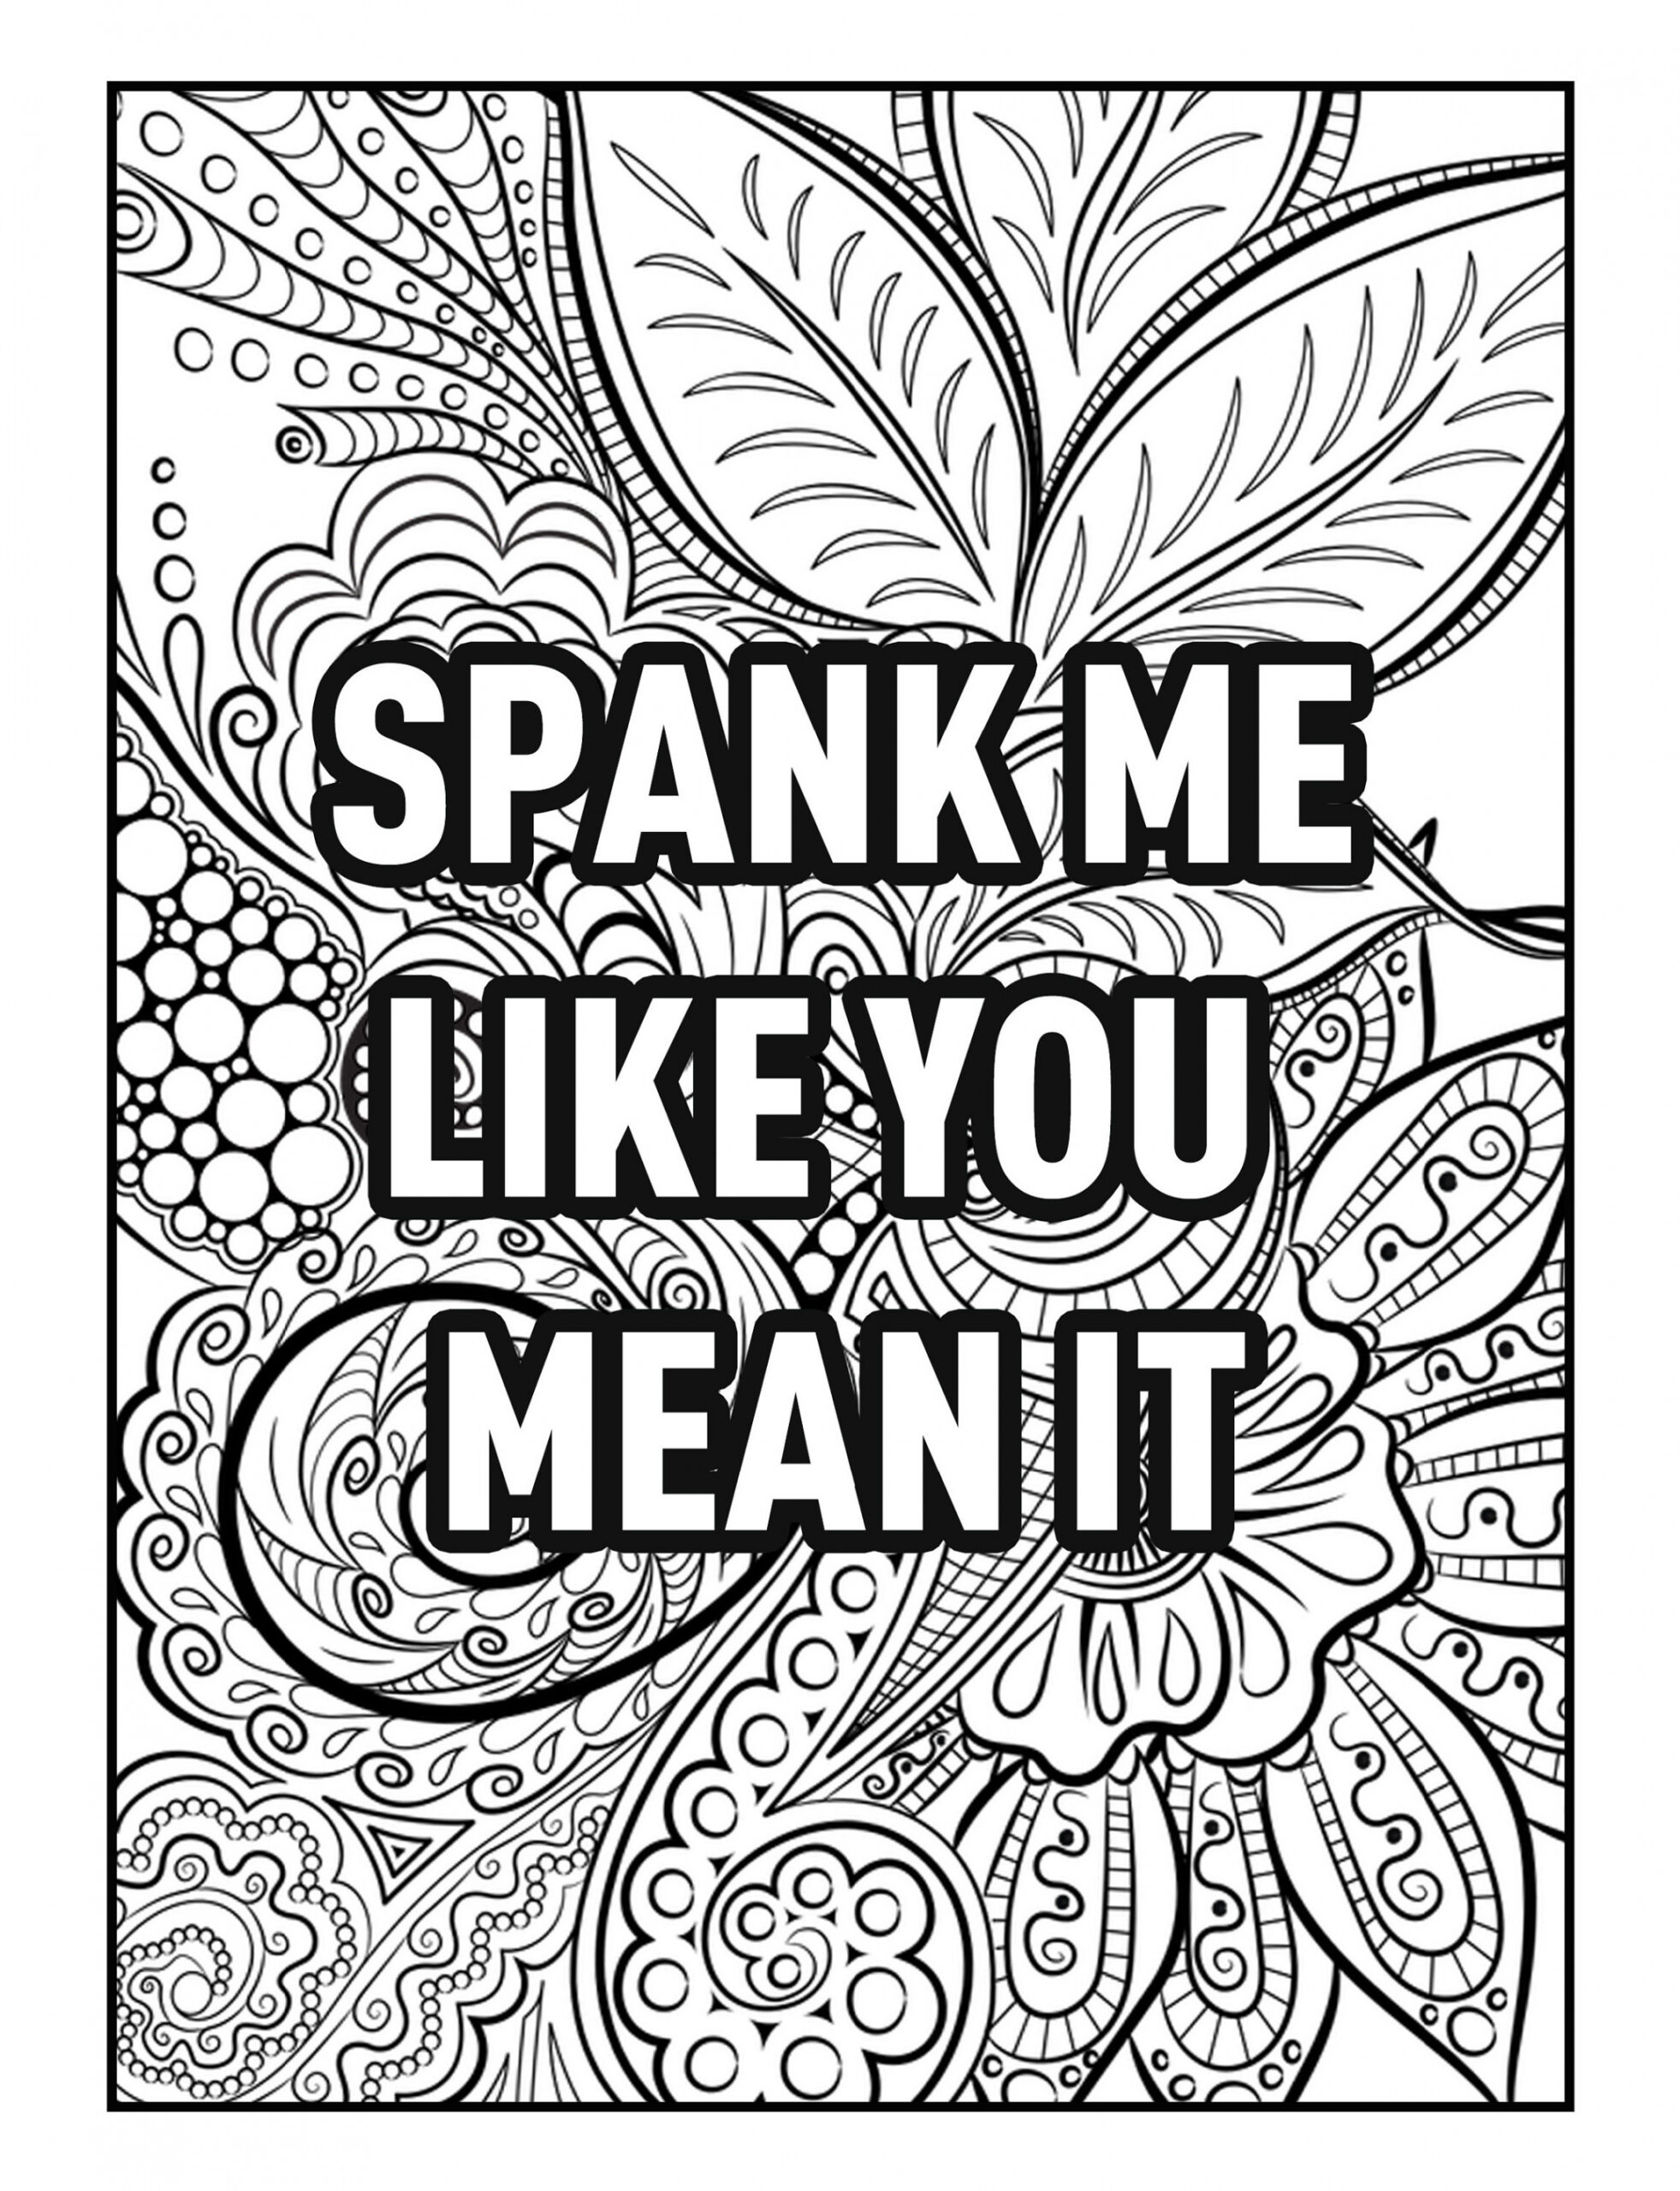 Dirty Funny Coloring Pages for Adults Adult Coloring Book - Etsy